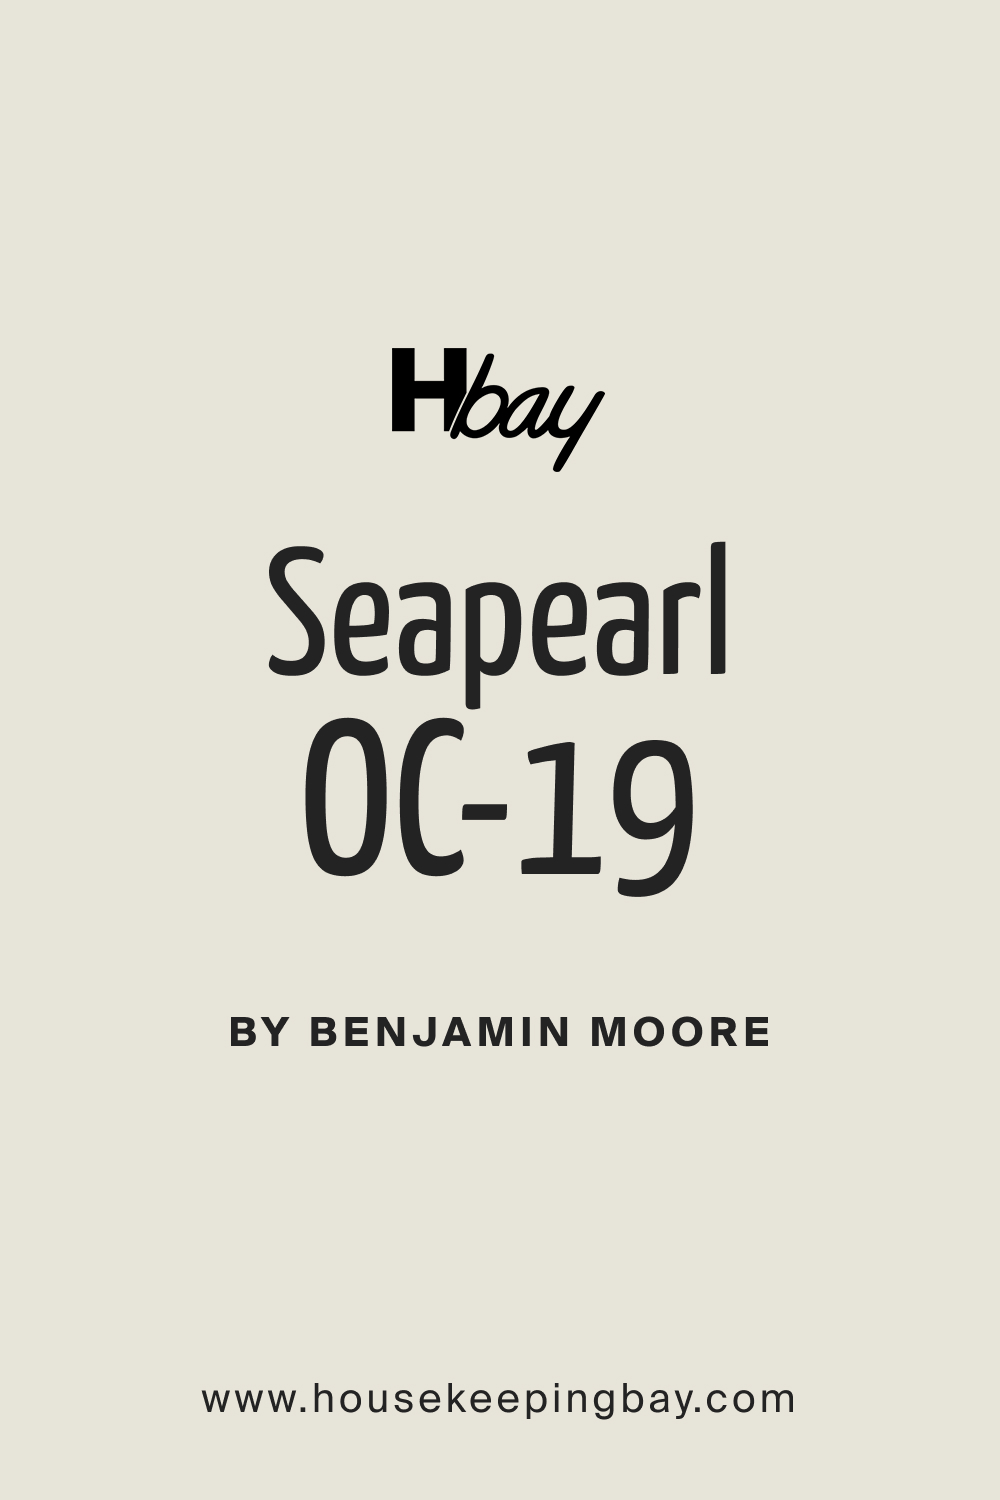 Seapearl OC 19 Paint Color by Benjamin Moore